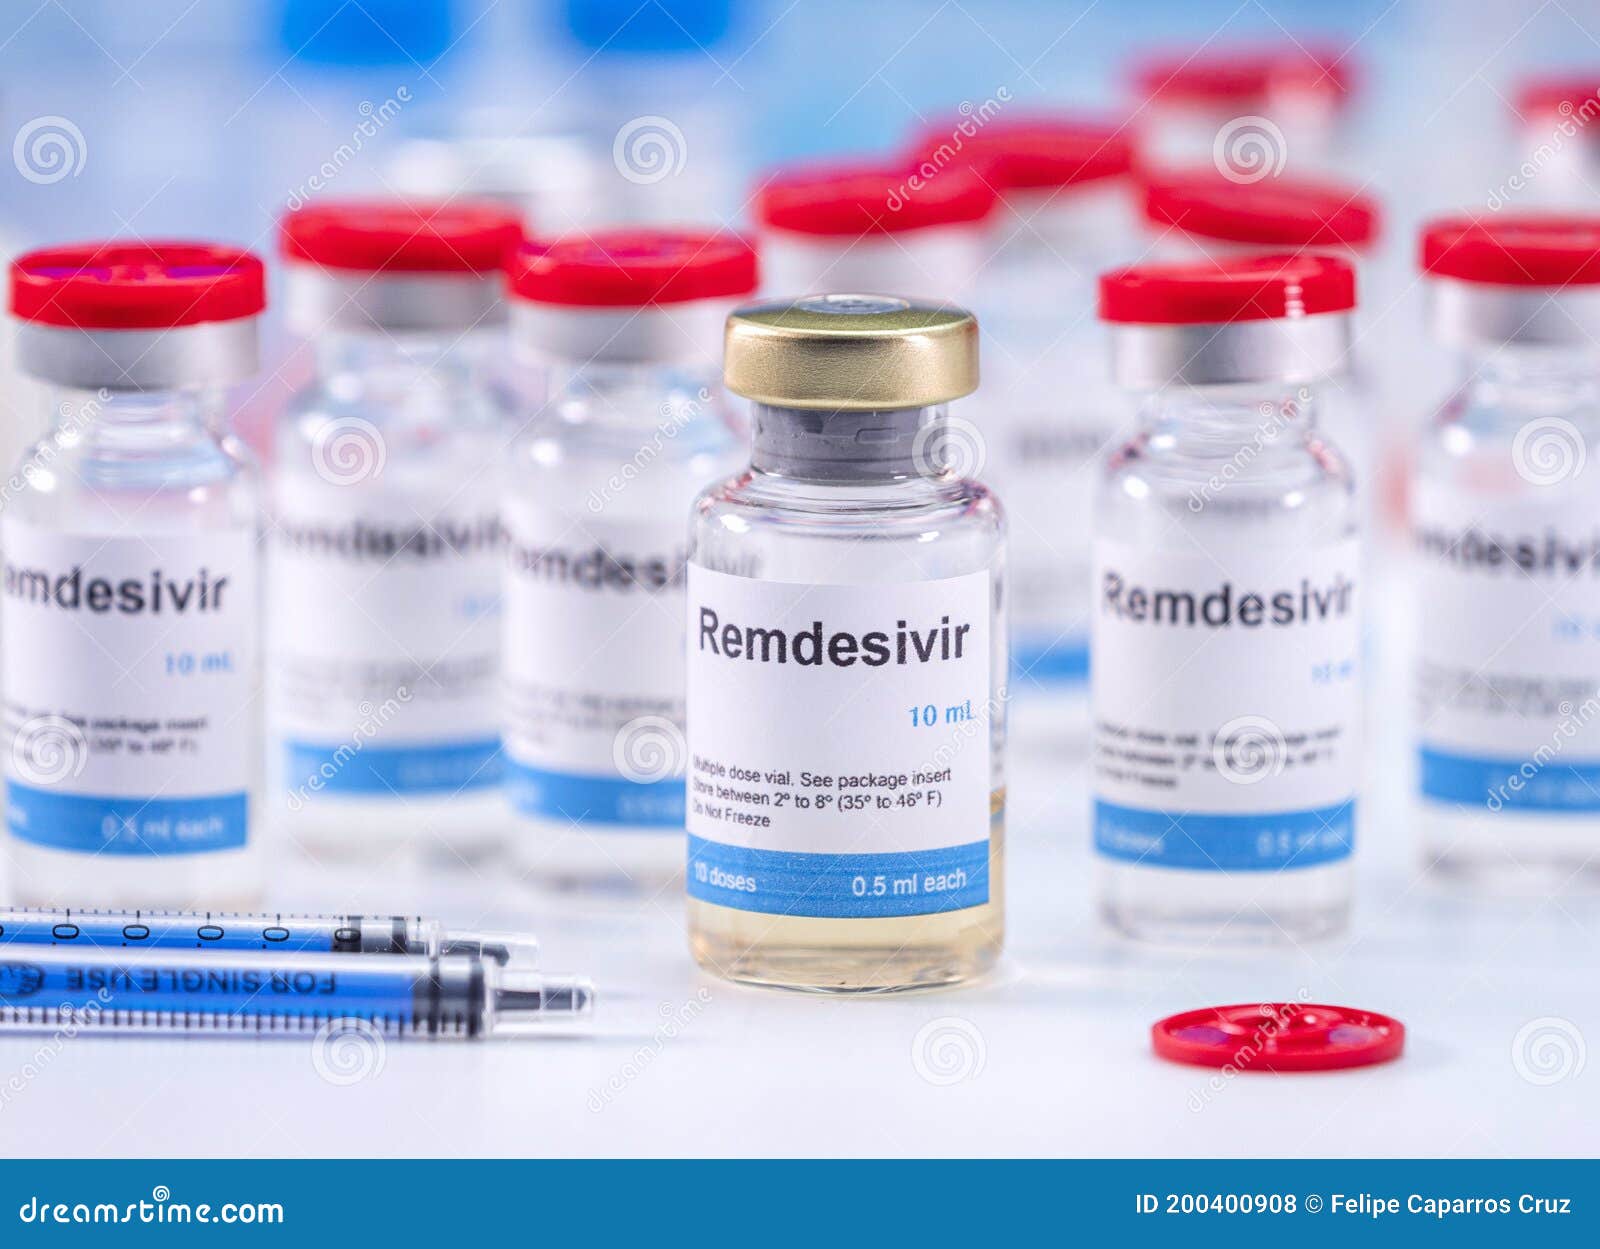 medication prepared for people affected by covid-19, remdesivir is a selective antiviral prophylactic against virus that is